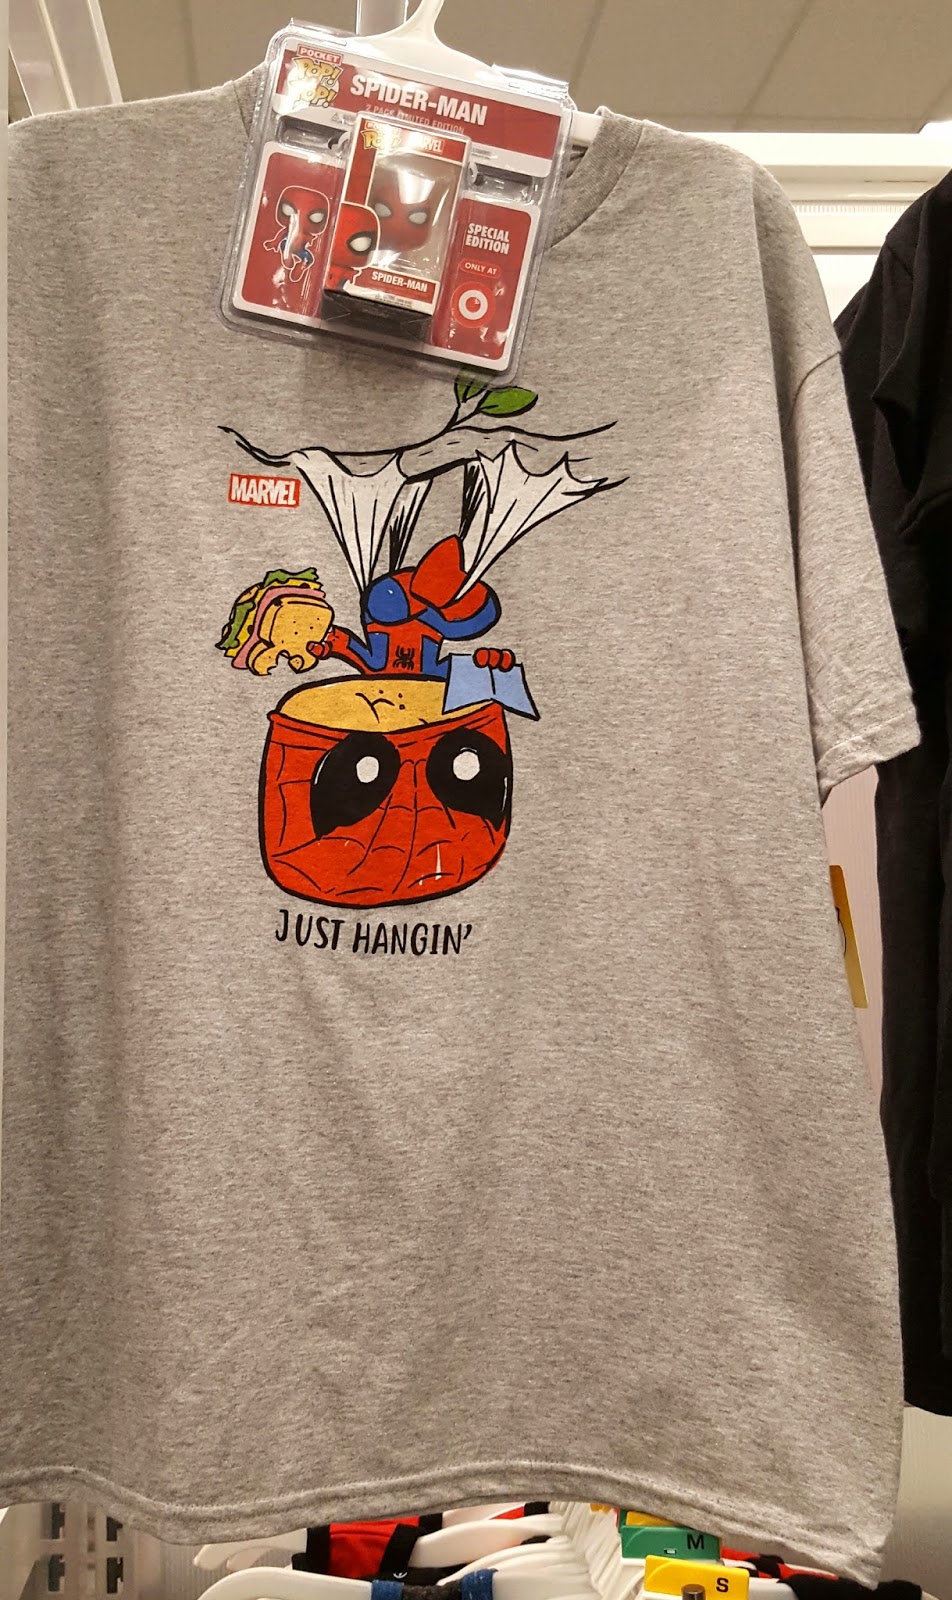 Disney at Heart: This Spider-Man Shirt from Funko is Too Cute!